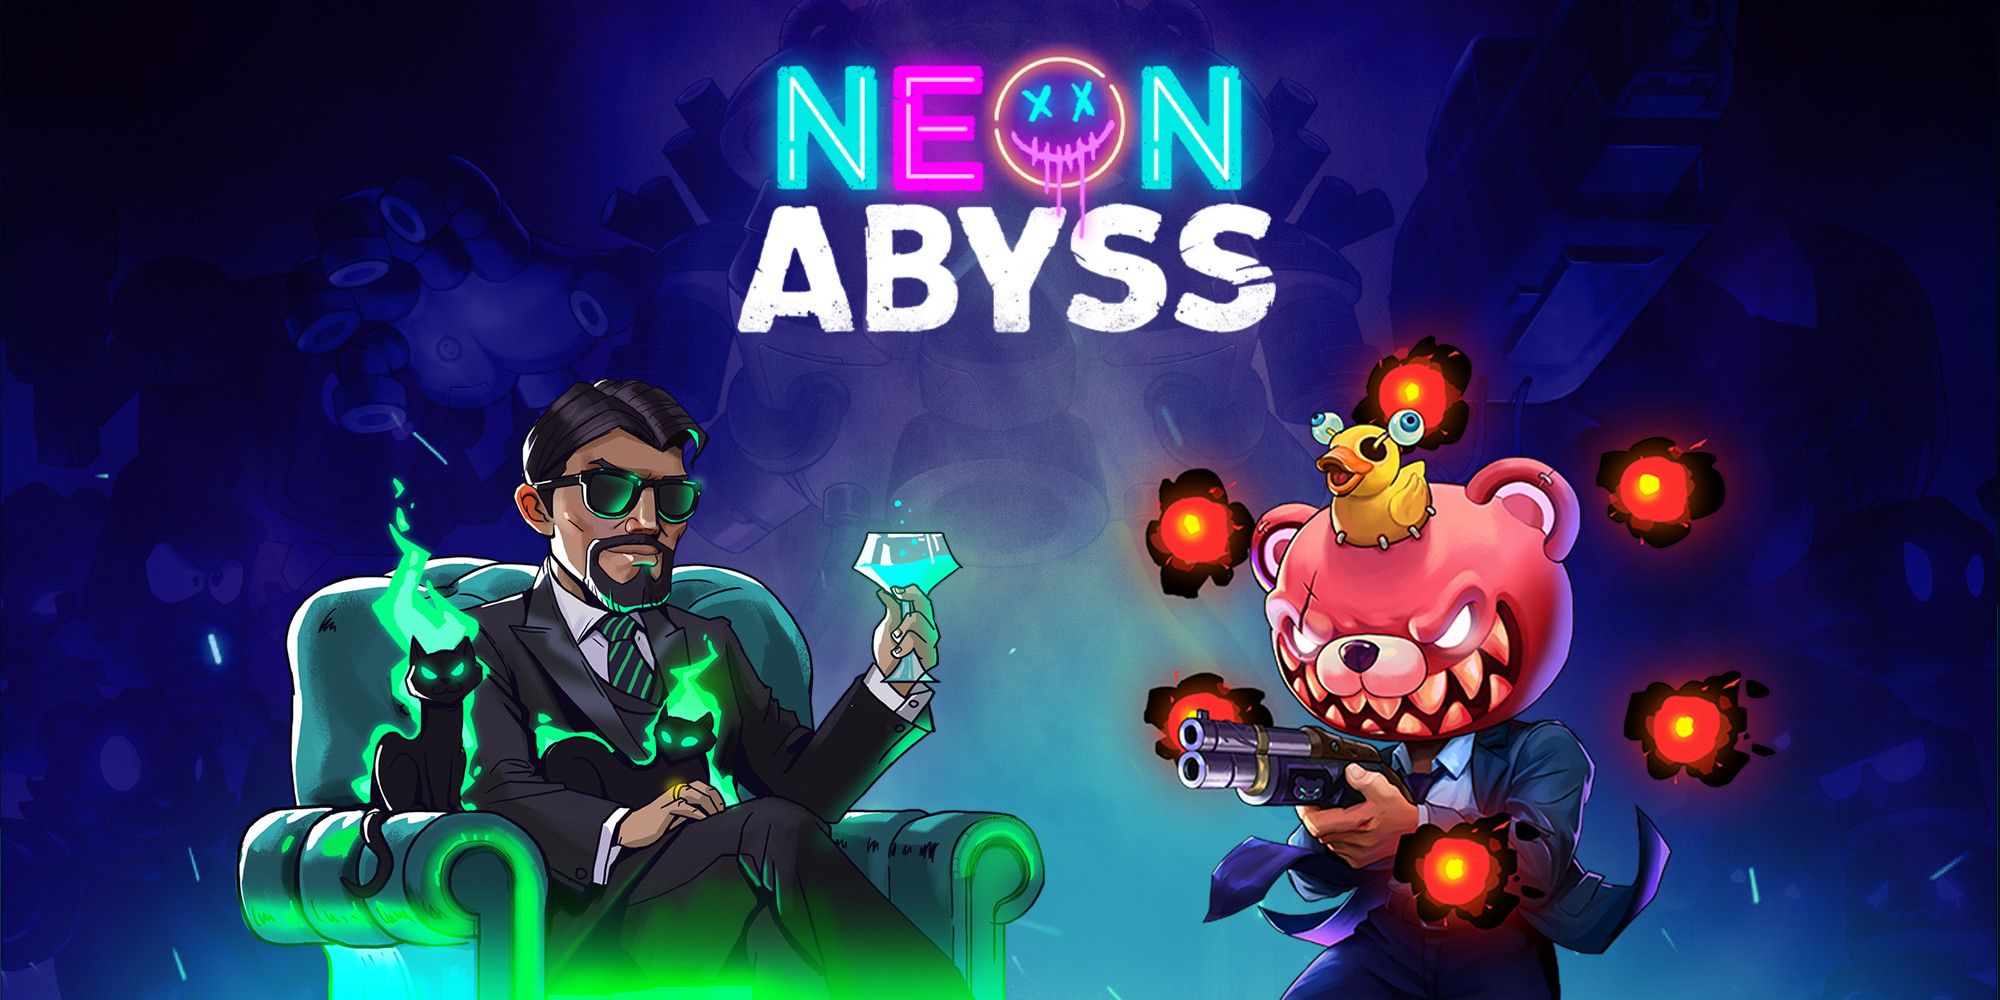 neon abyss switch price